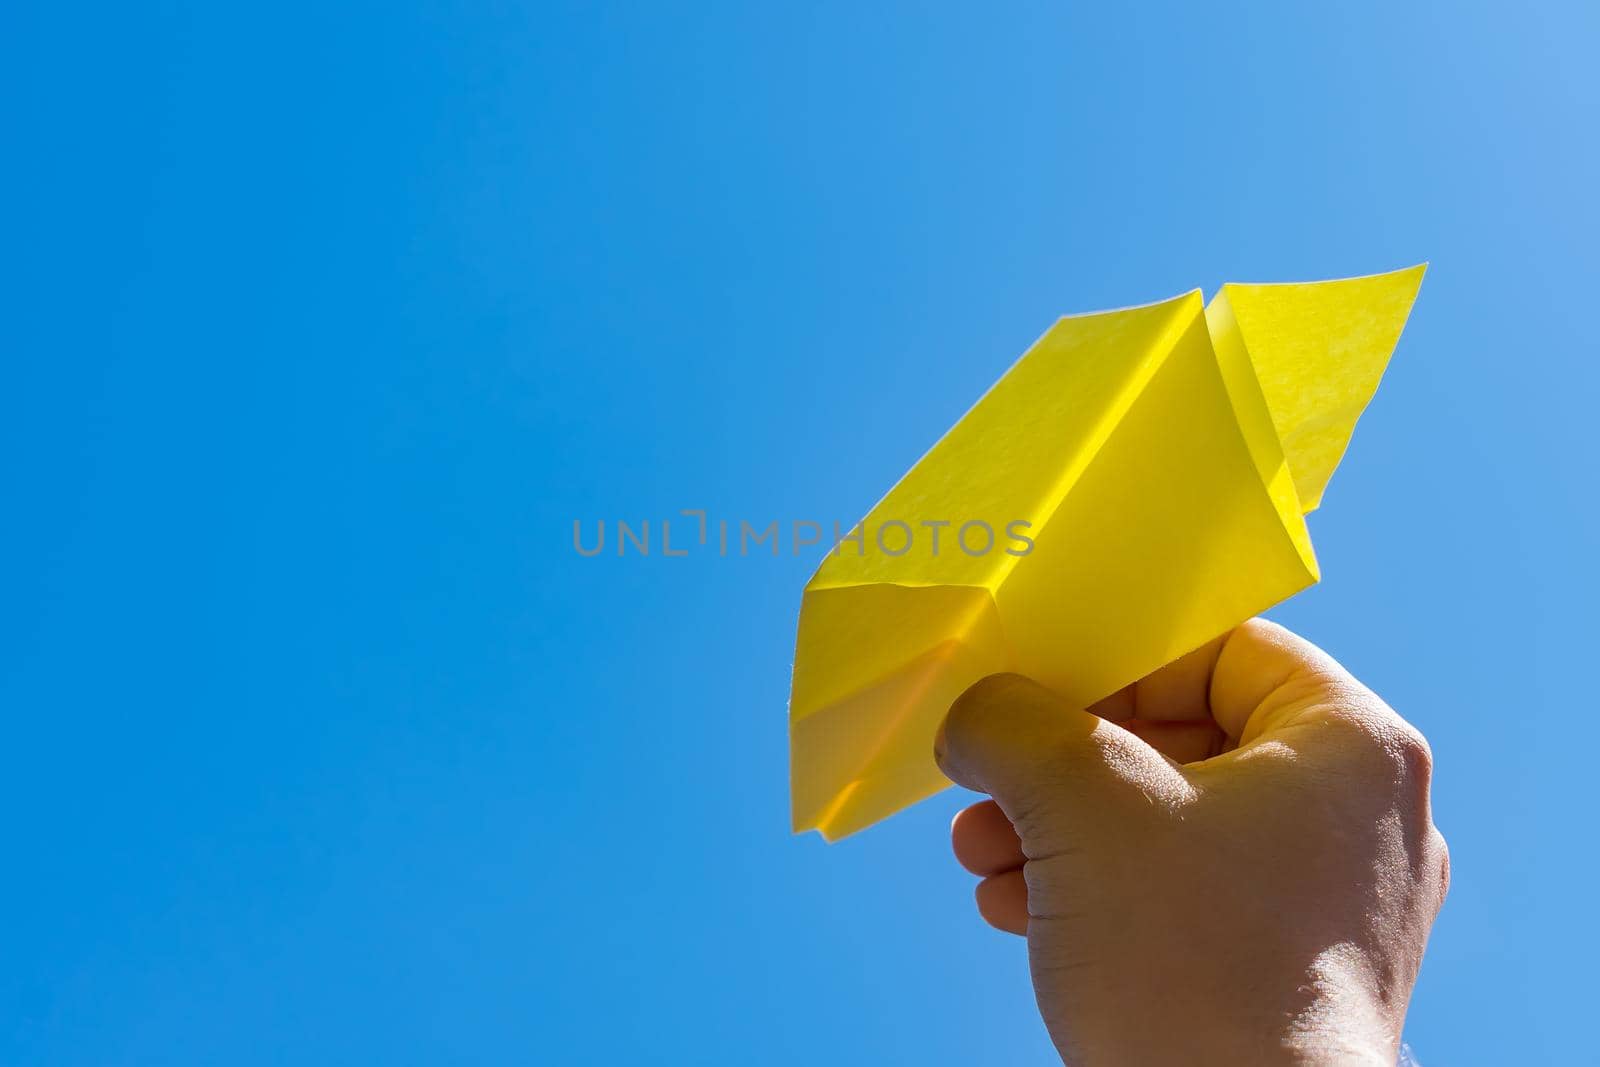 Launching a paper plane into a clear sky, as a symbol of peace and freedom, as well as success and a hobby. Man launches paper plane into the sky with hands close up